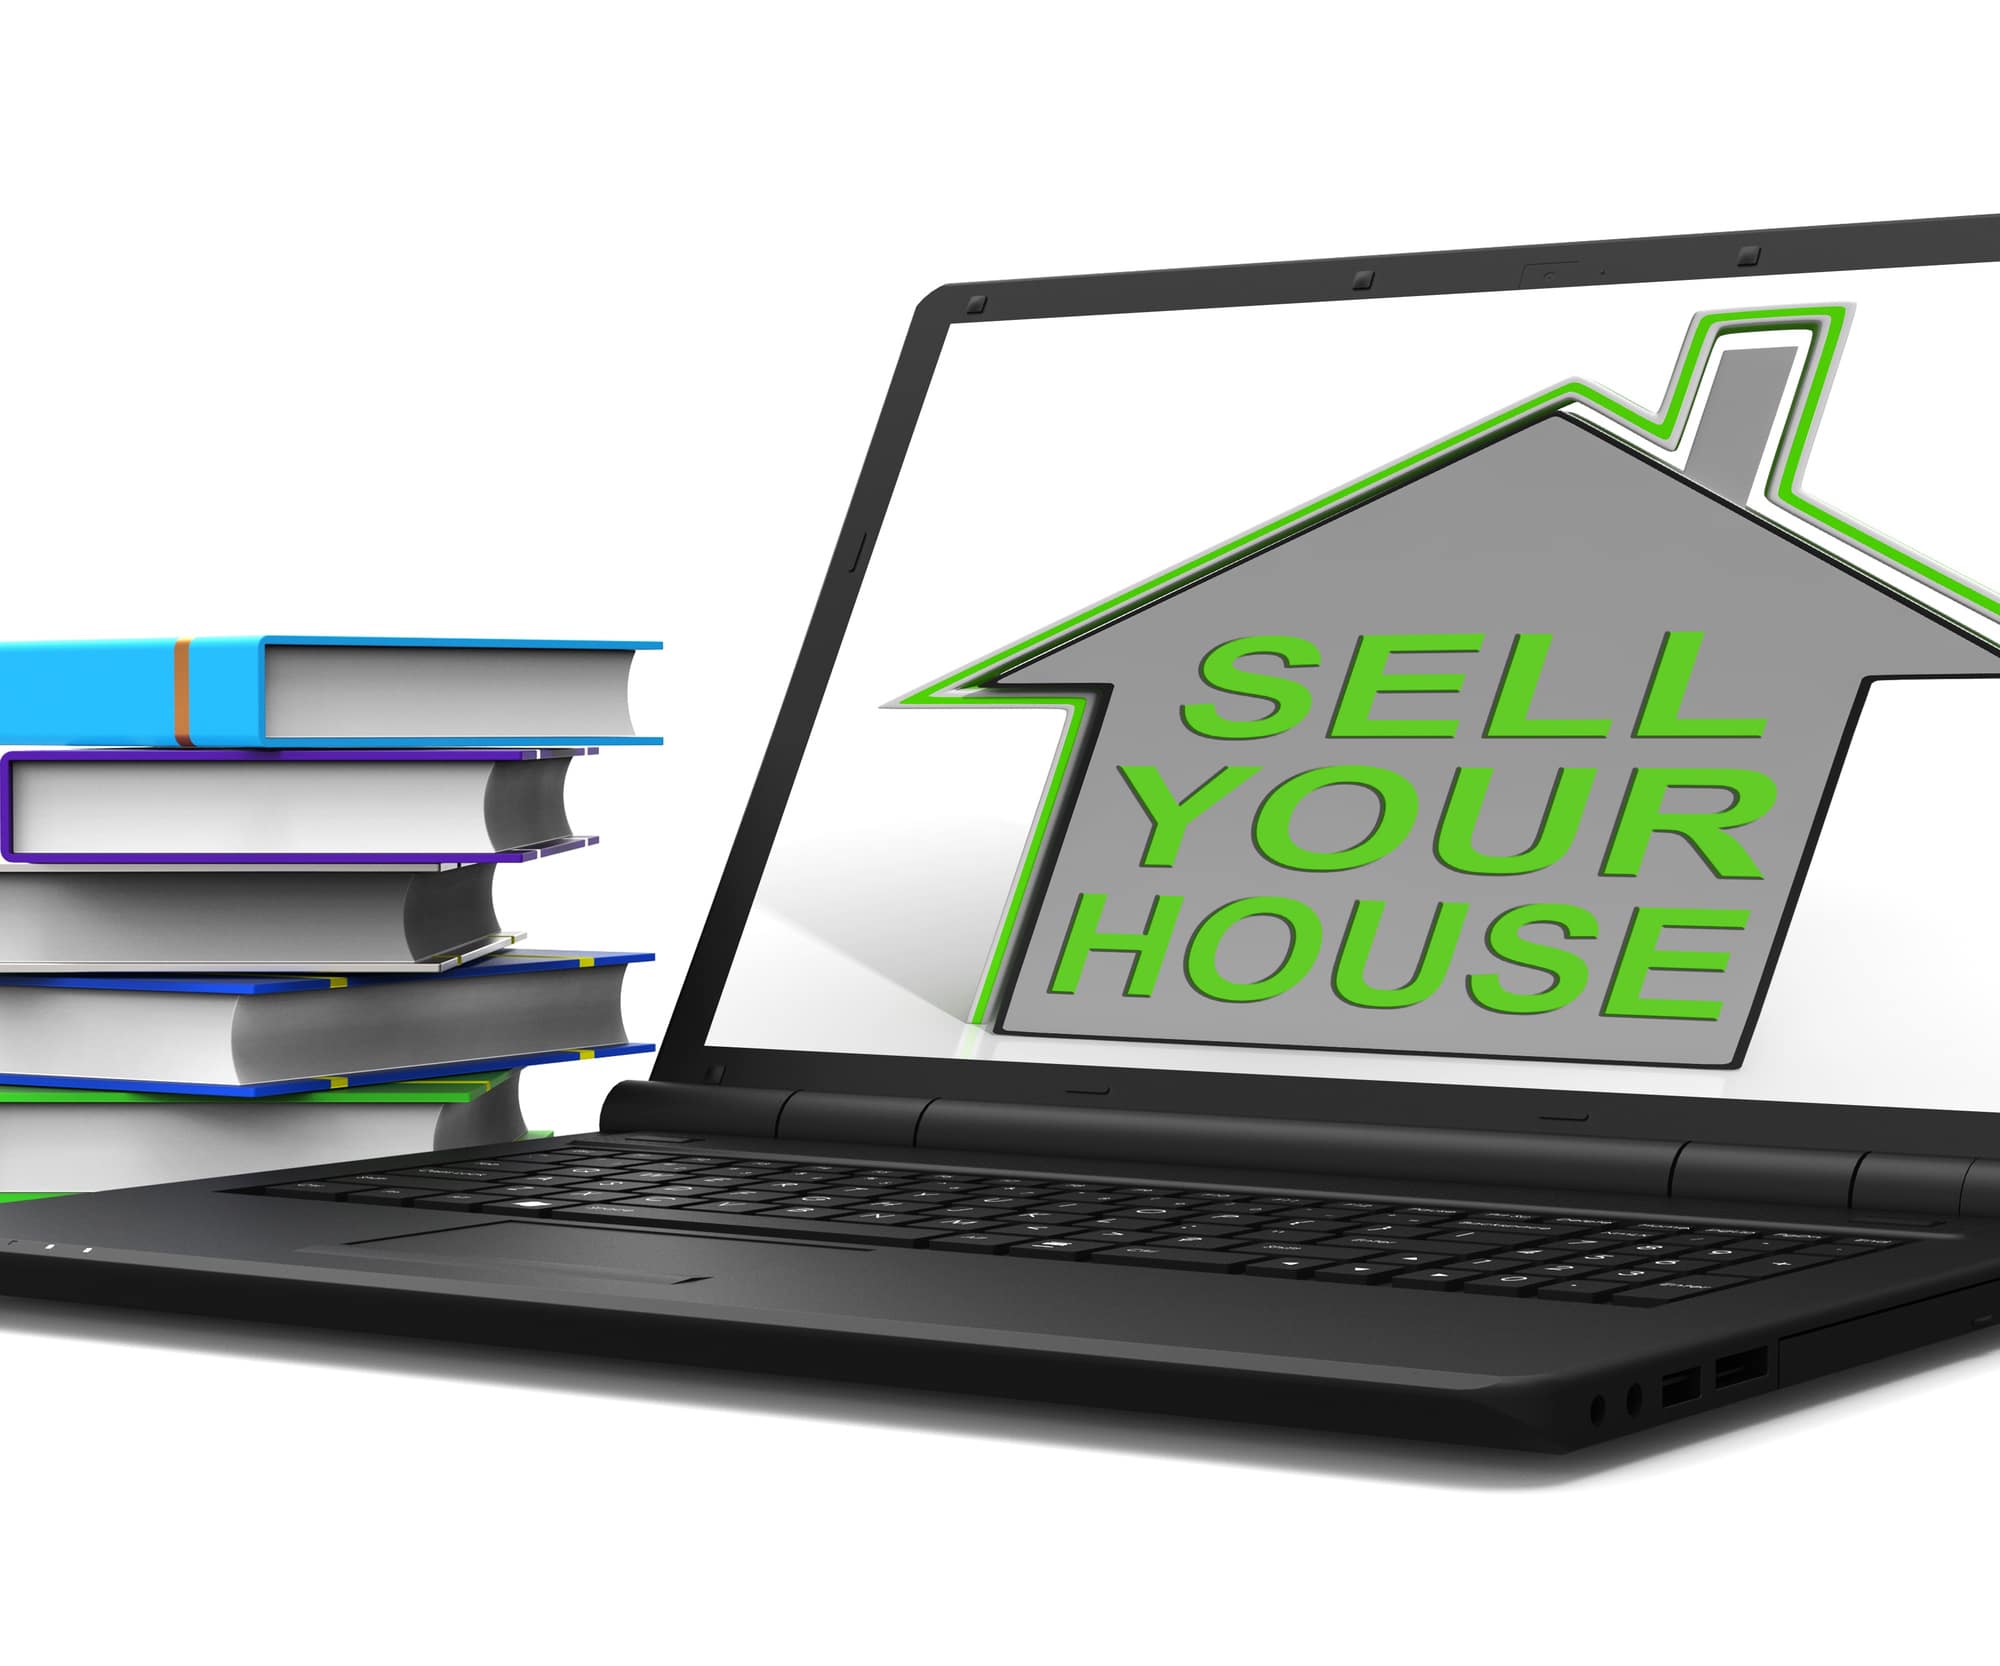 7 Legitimate Tips to Sell a House Quickly